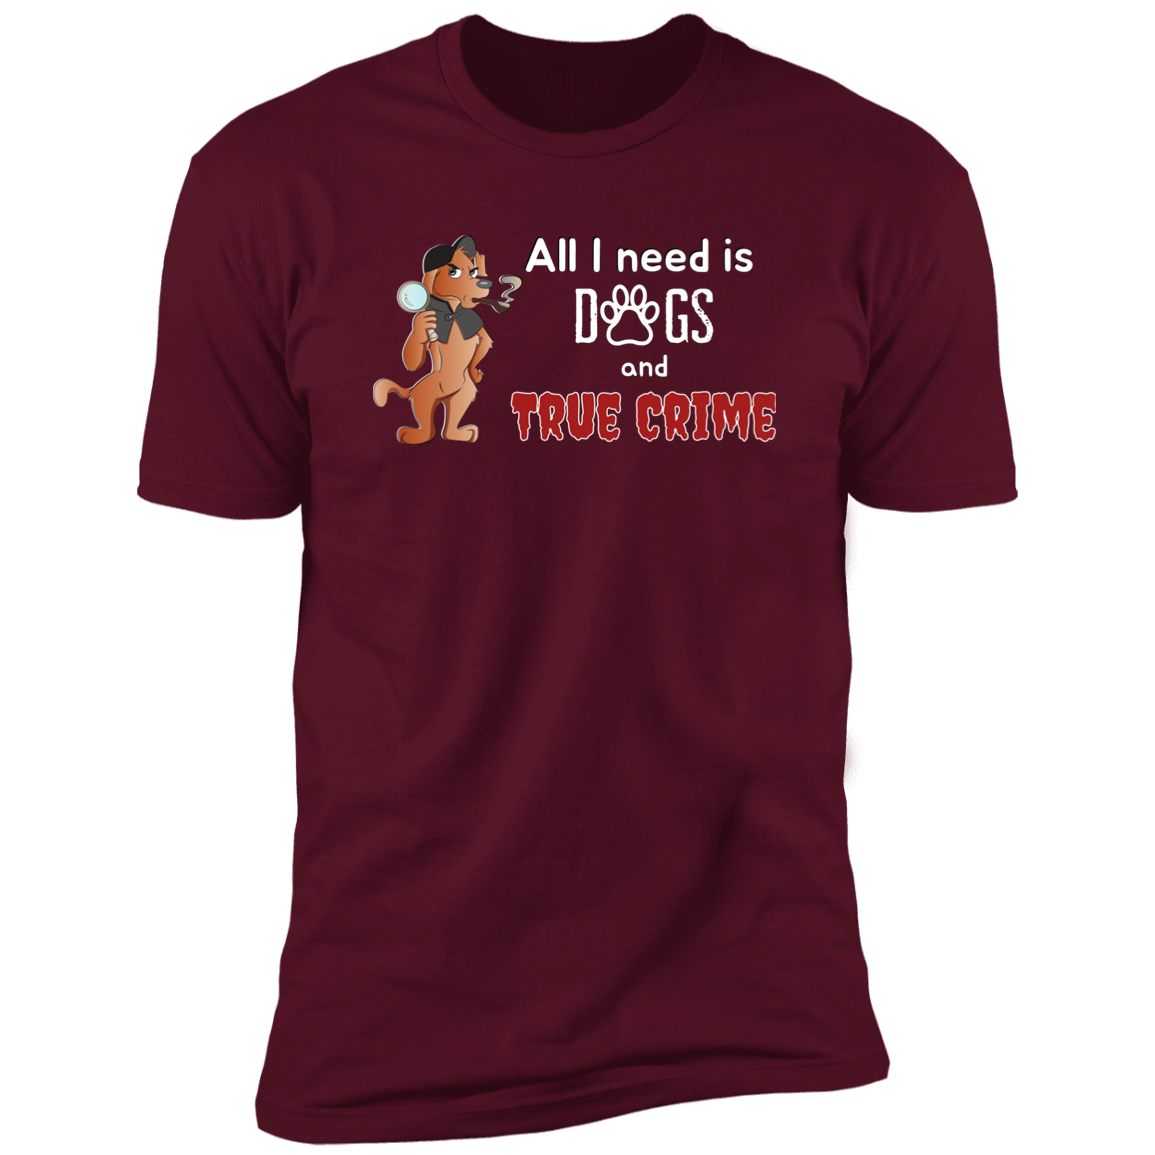 All I Need is Dogs and True Crime, Dog shirt for humas, in maroon